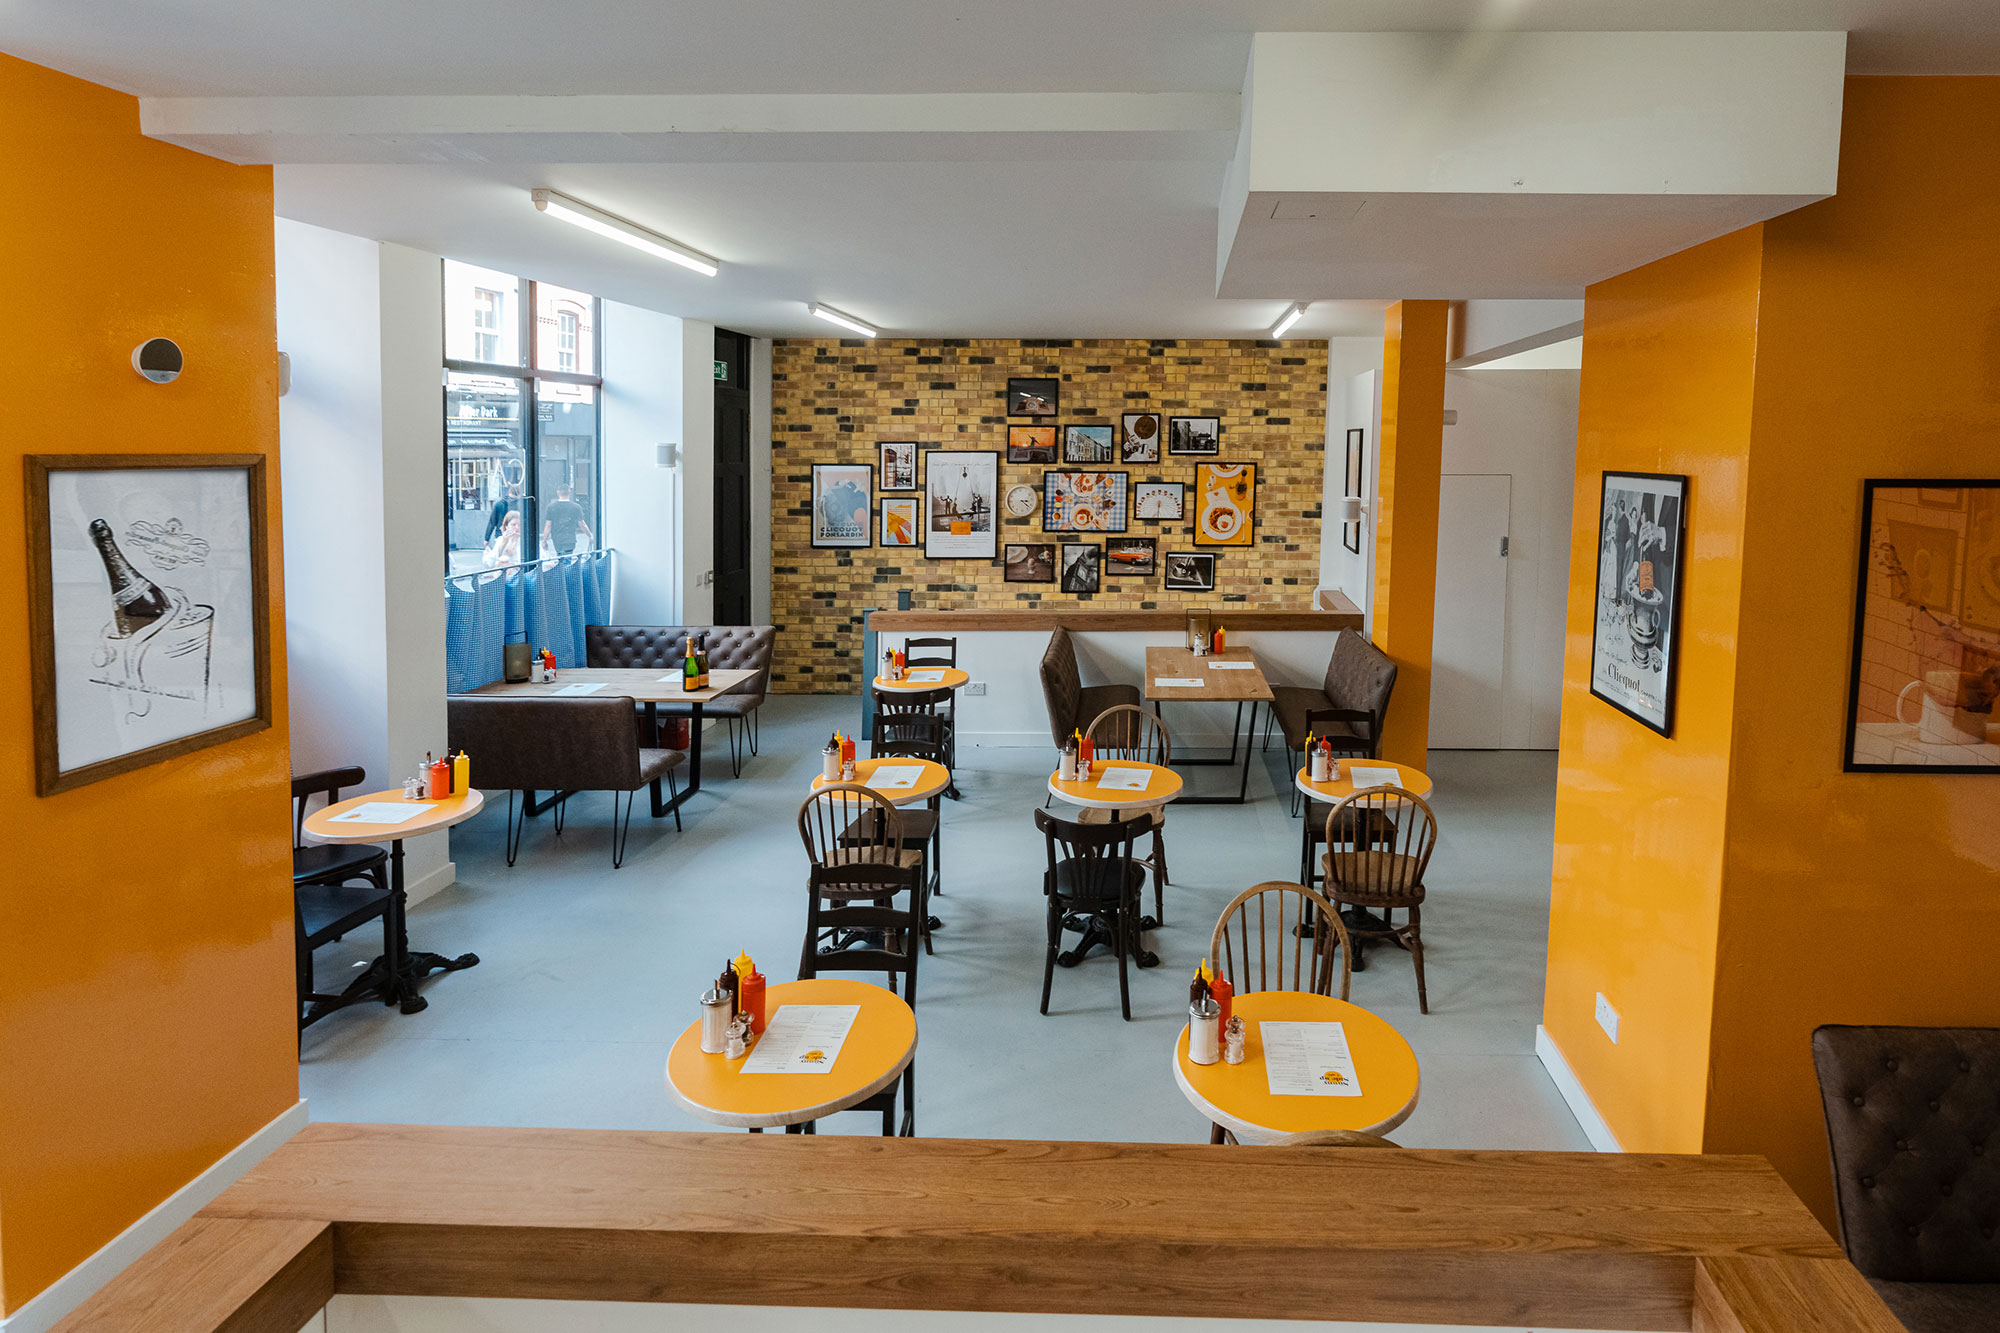 The yellow inflected Sunny Side Up Café by Veuve Clicquot